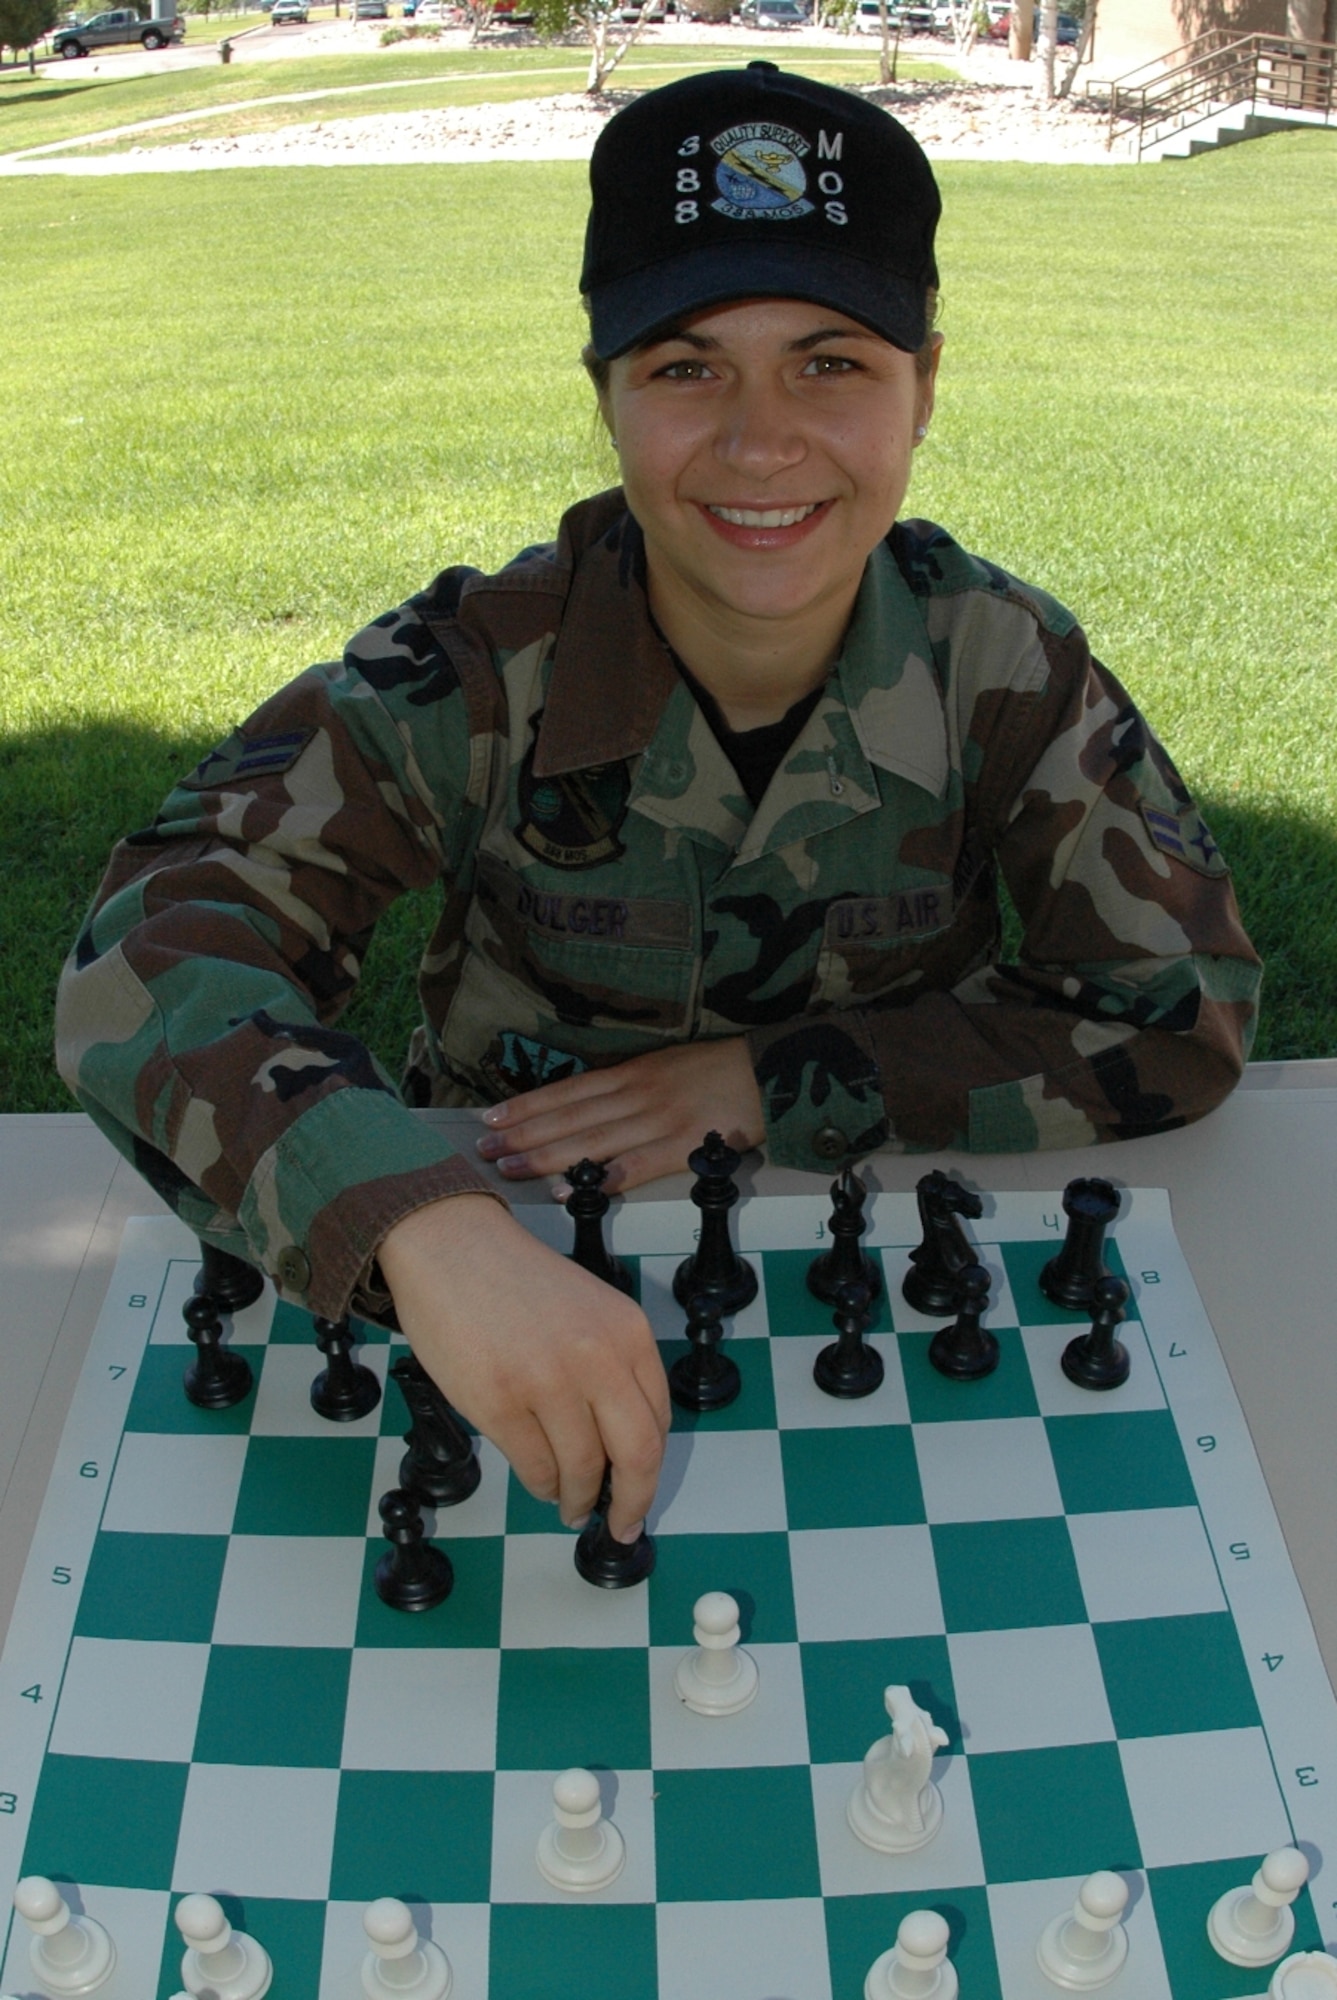 Airman 1st Class Elena Dulger, 388th Maintenance Operations Squadron, won the Hill Air Force Base chess tournament and took second place at the Air Force Materiel Command tournament. (U.S. Air Force photo by Beth Young)